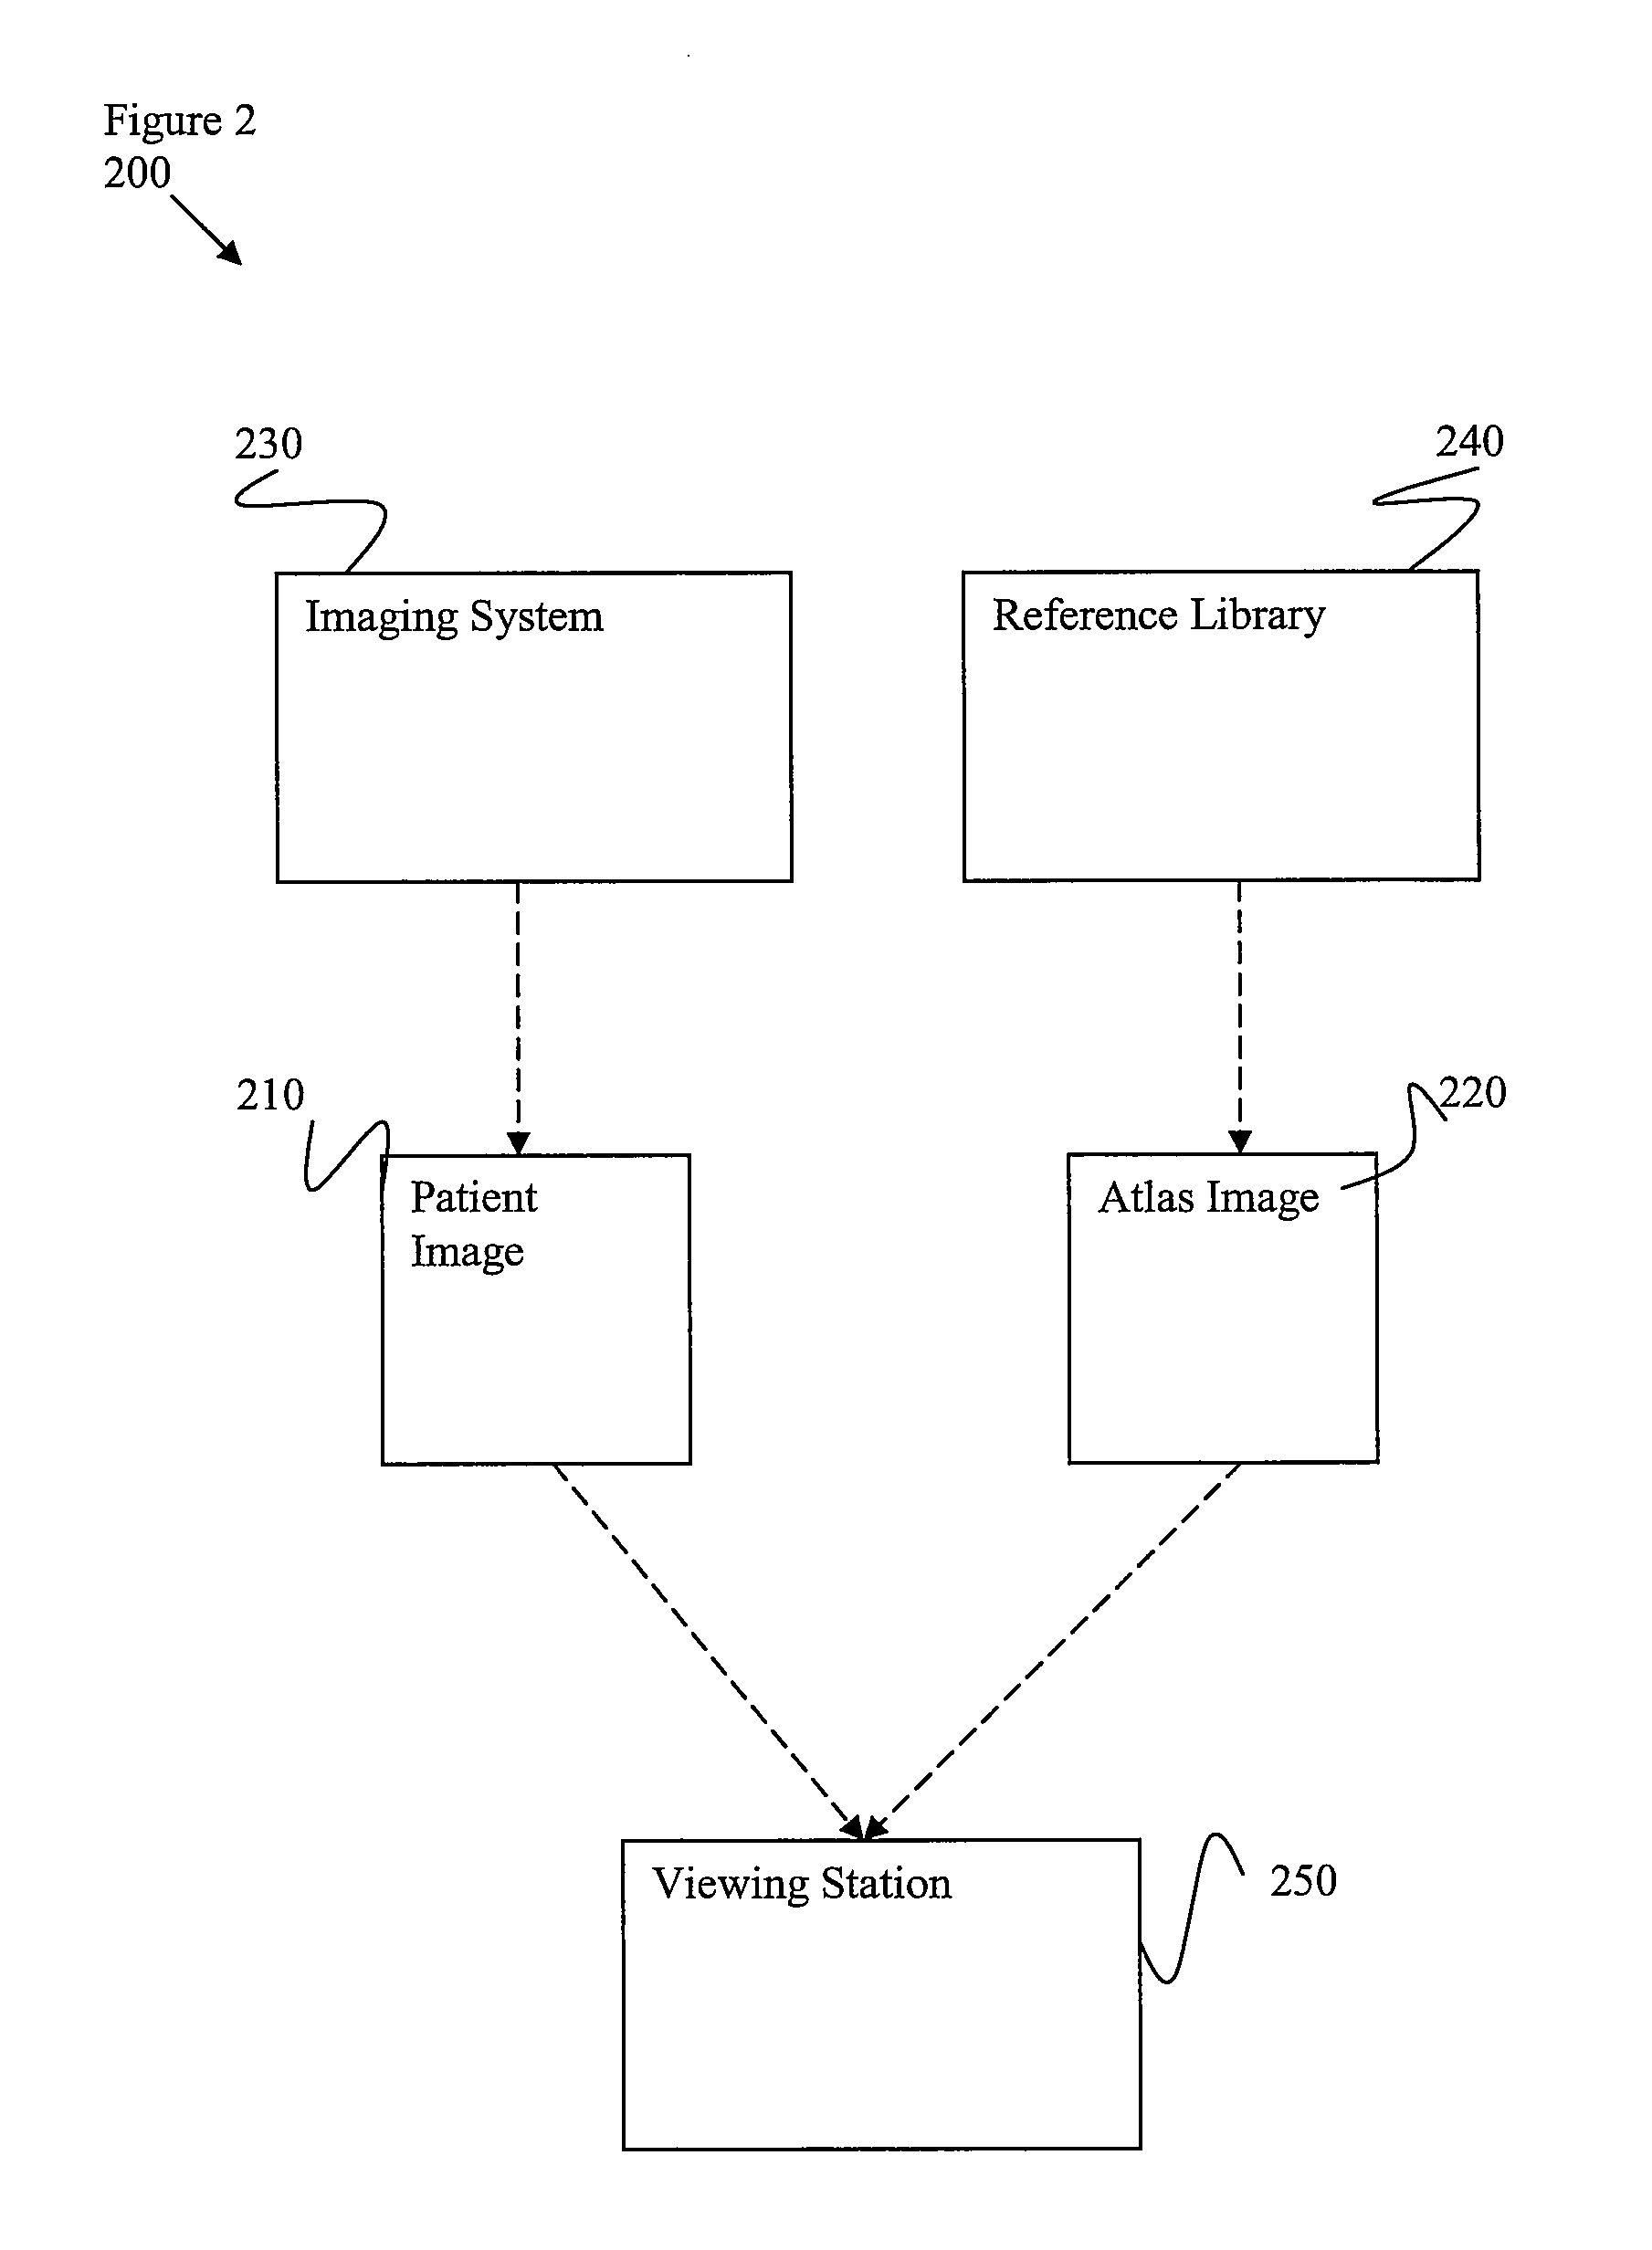 Systems and Methods for Synchronized Image Viewing With an Image Atlas